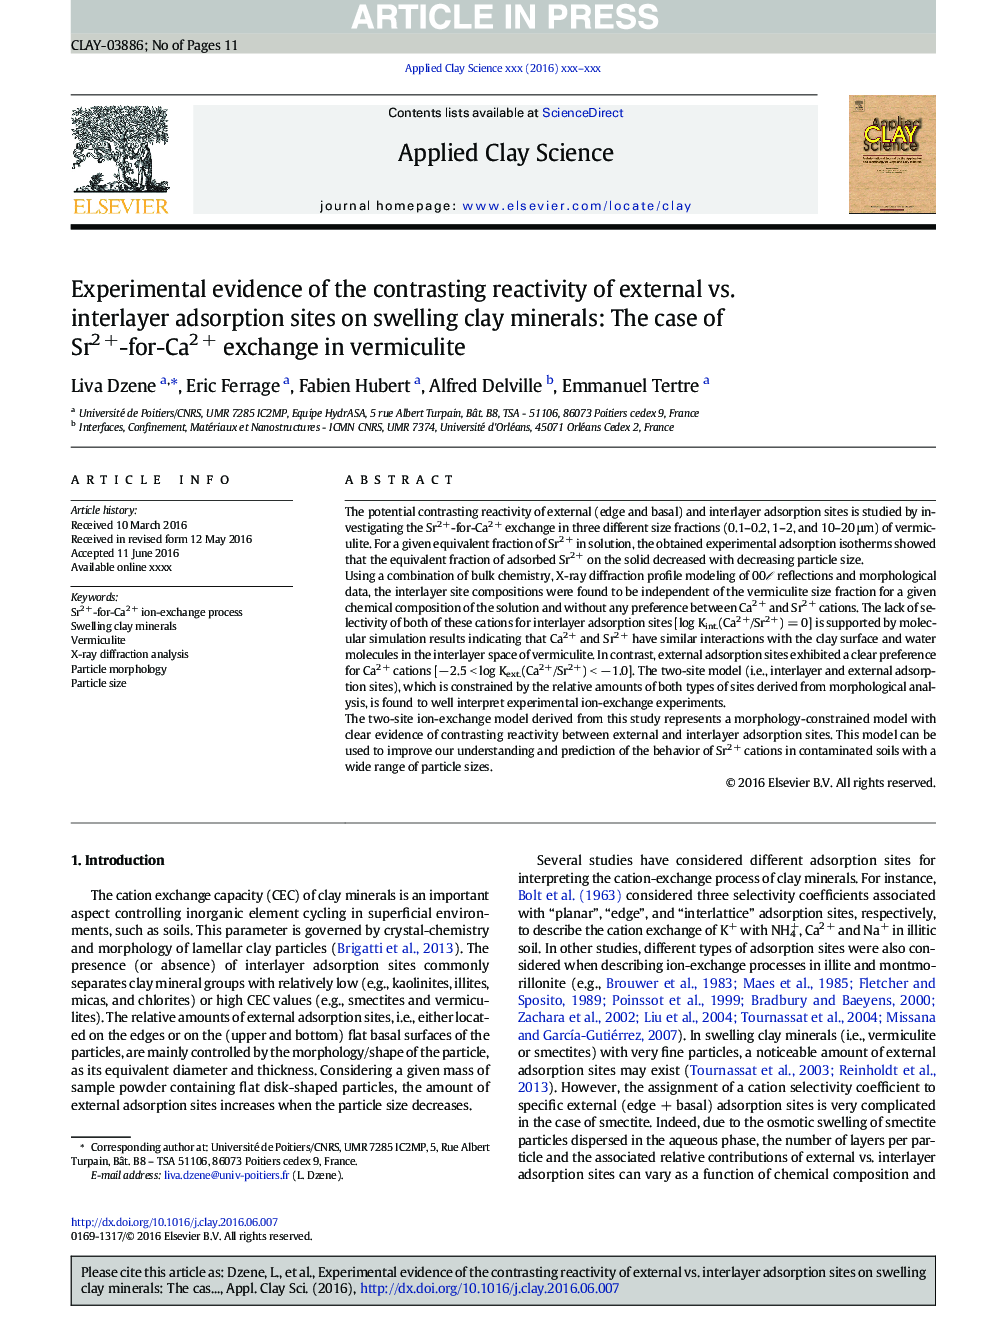 Experimental evidence of the contrasting reactivity of external vs. interlayer adsorption sites on swelling clay minerals: The case of Sr2Â +-for-Ca2Â + exchange in vermiculite